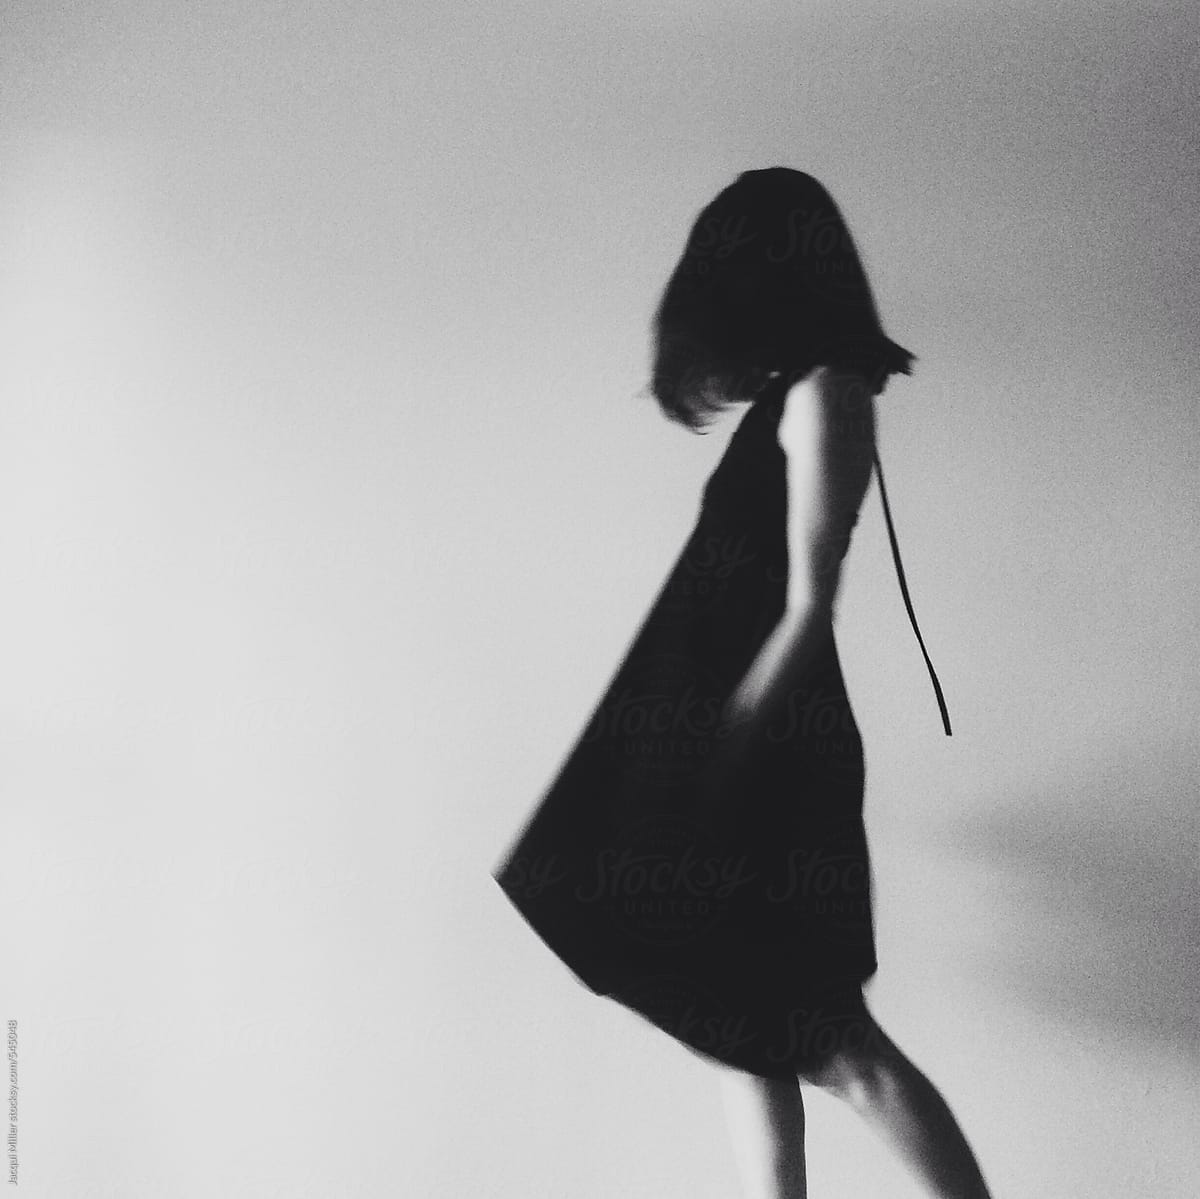 Black and White minimalist image of unrecognisable woman wearing a dress